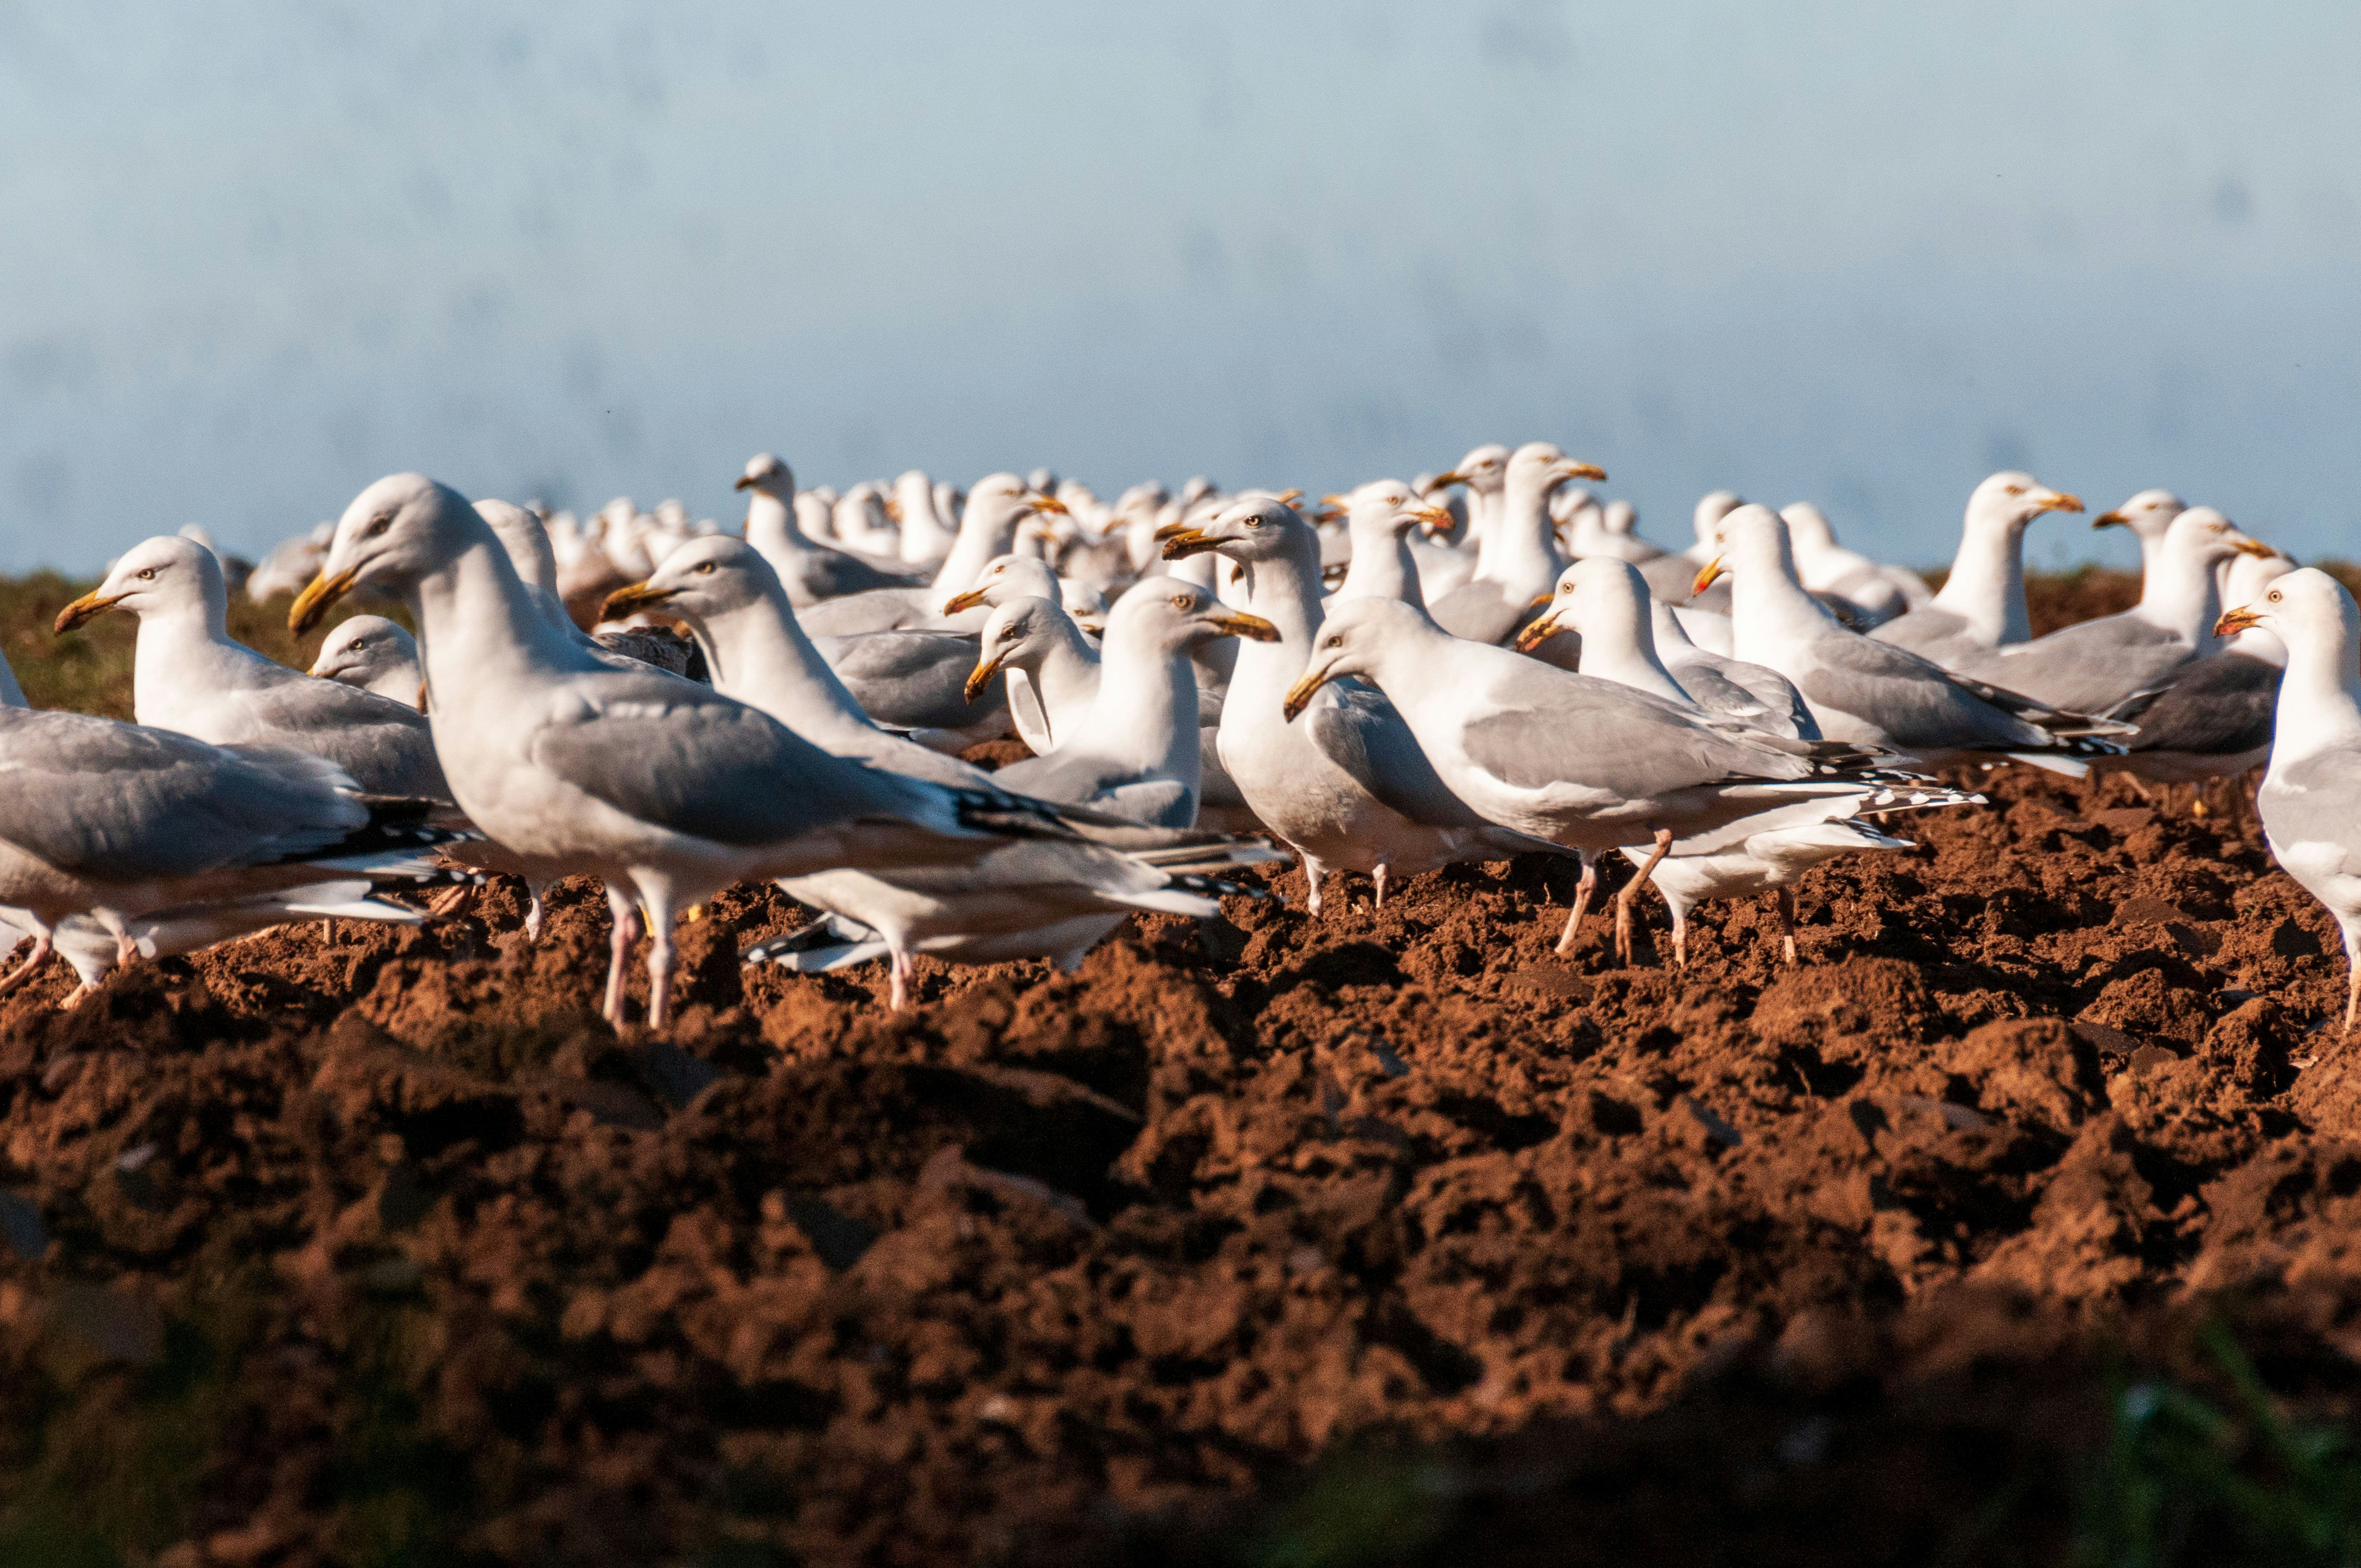 Seagulls feeding on worms as a tractor ploughs the field in The Fields, Jersey, Channel Islands